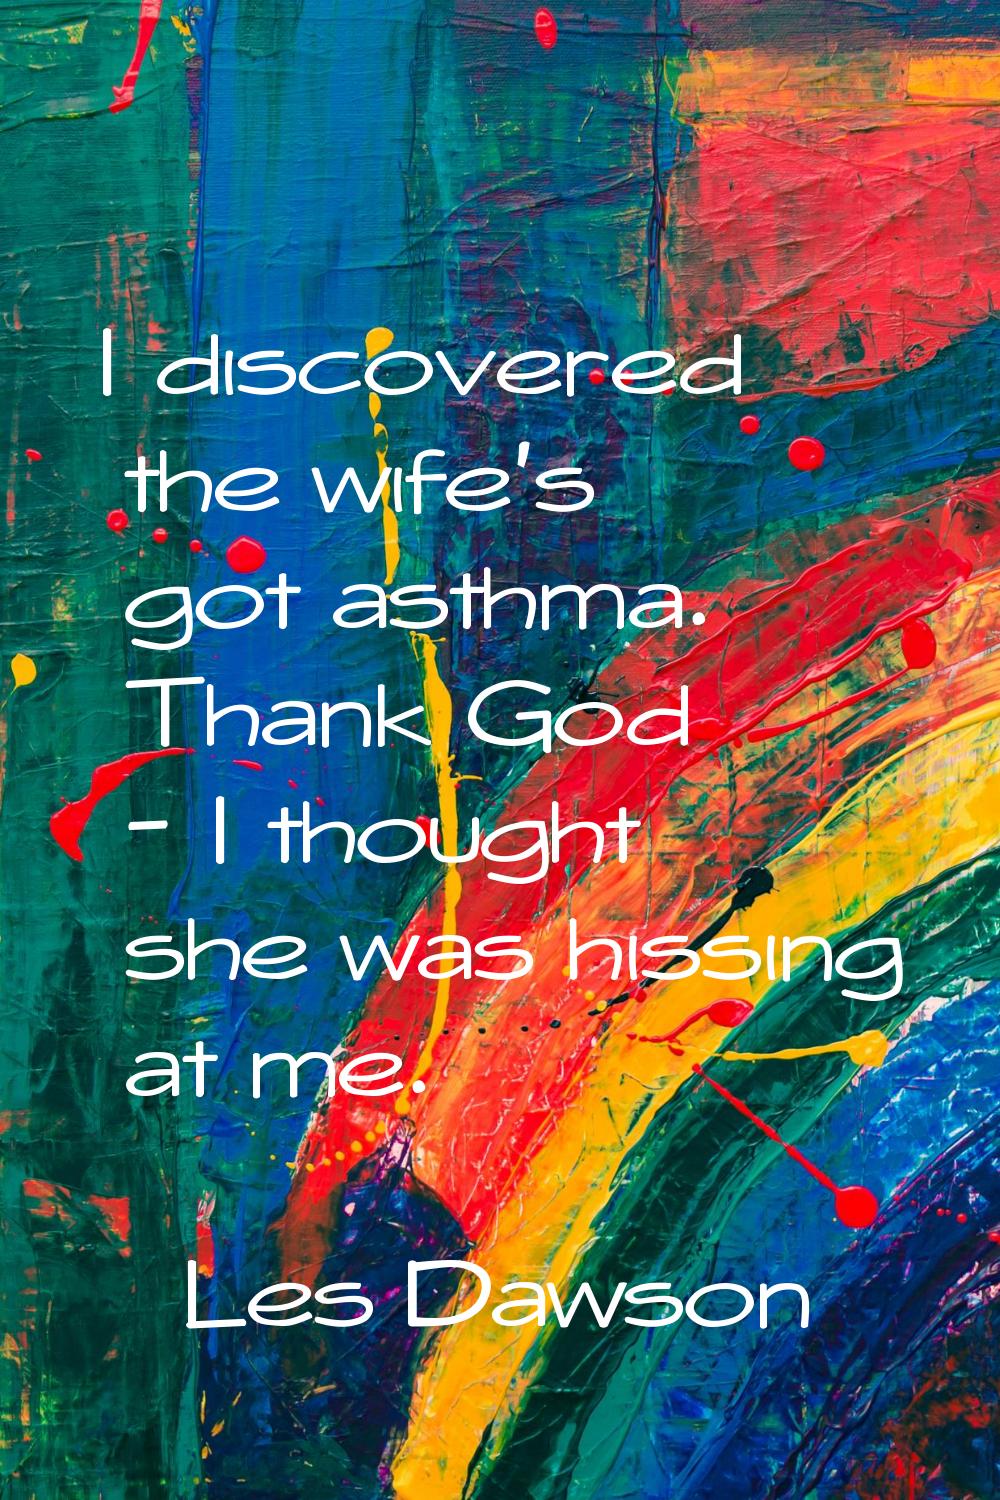 I discovered the wife's got asthma. Thank God - I thought she was hissing at me.